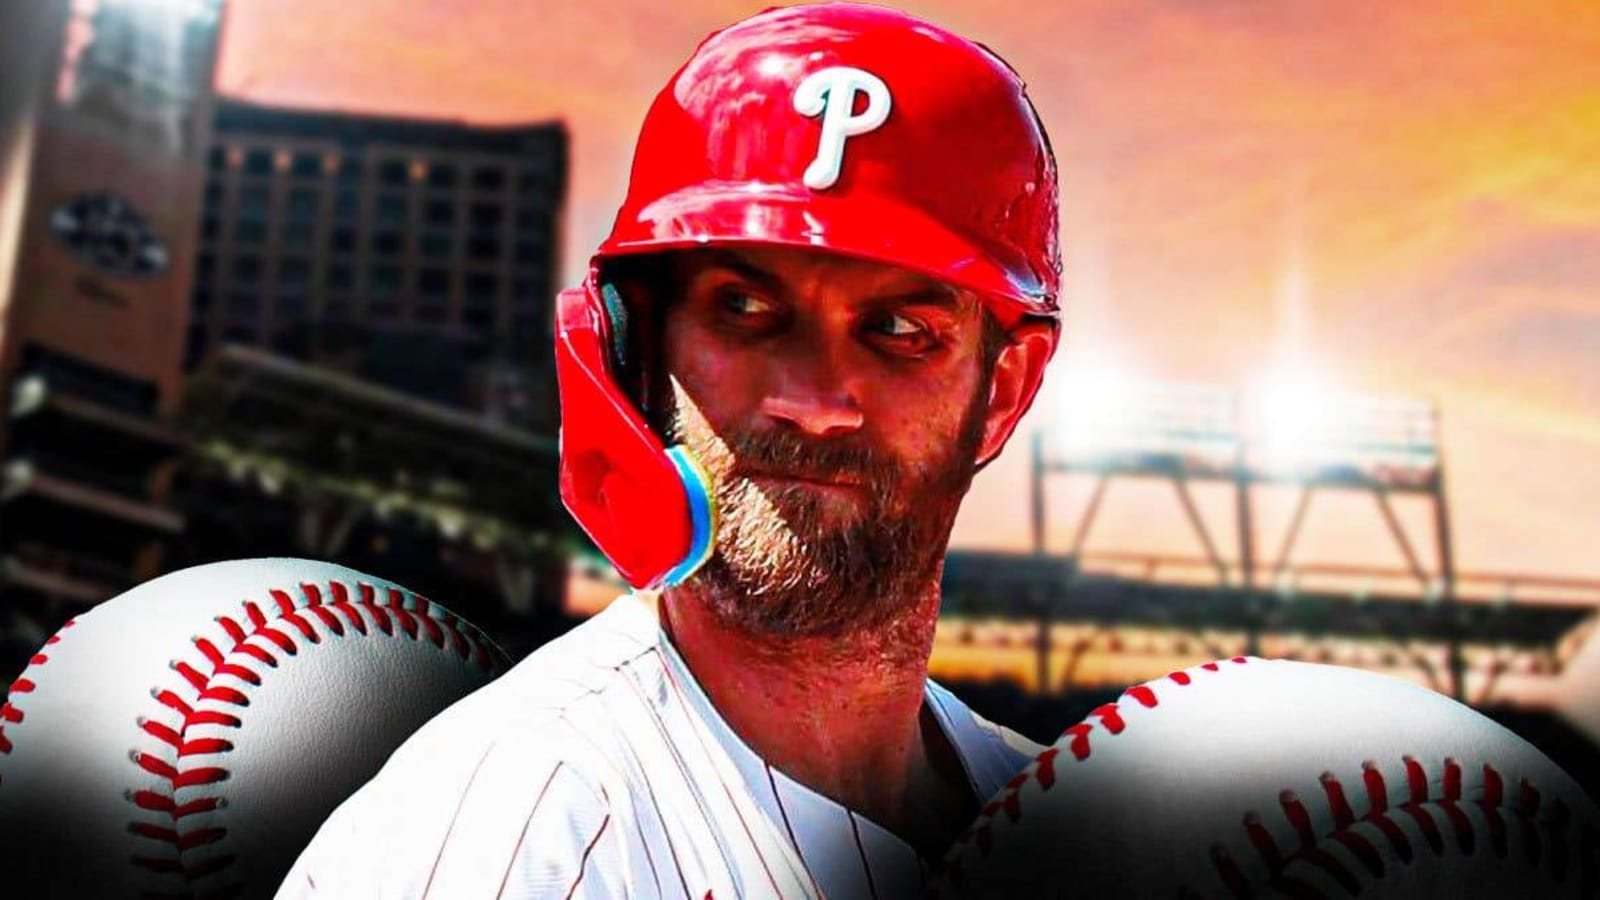 Phillies star Bryce Harper’s return date after spring training injury scare